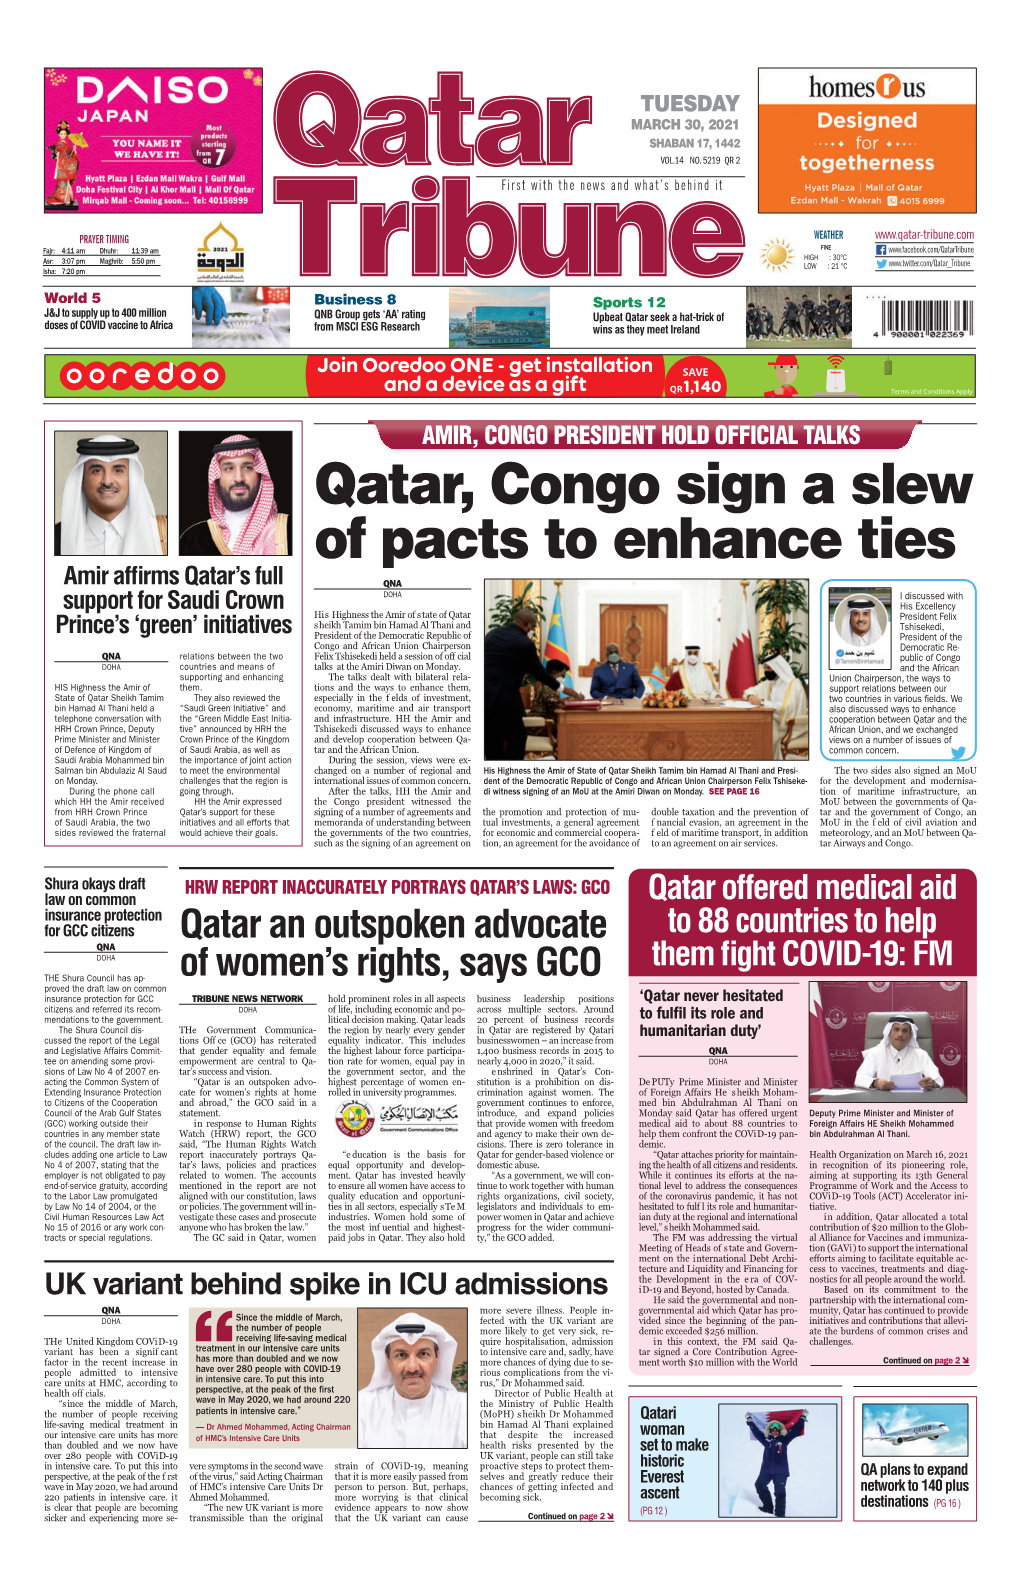 Qatar, Congo Sign a Slew of Pacts to Enhance Ties